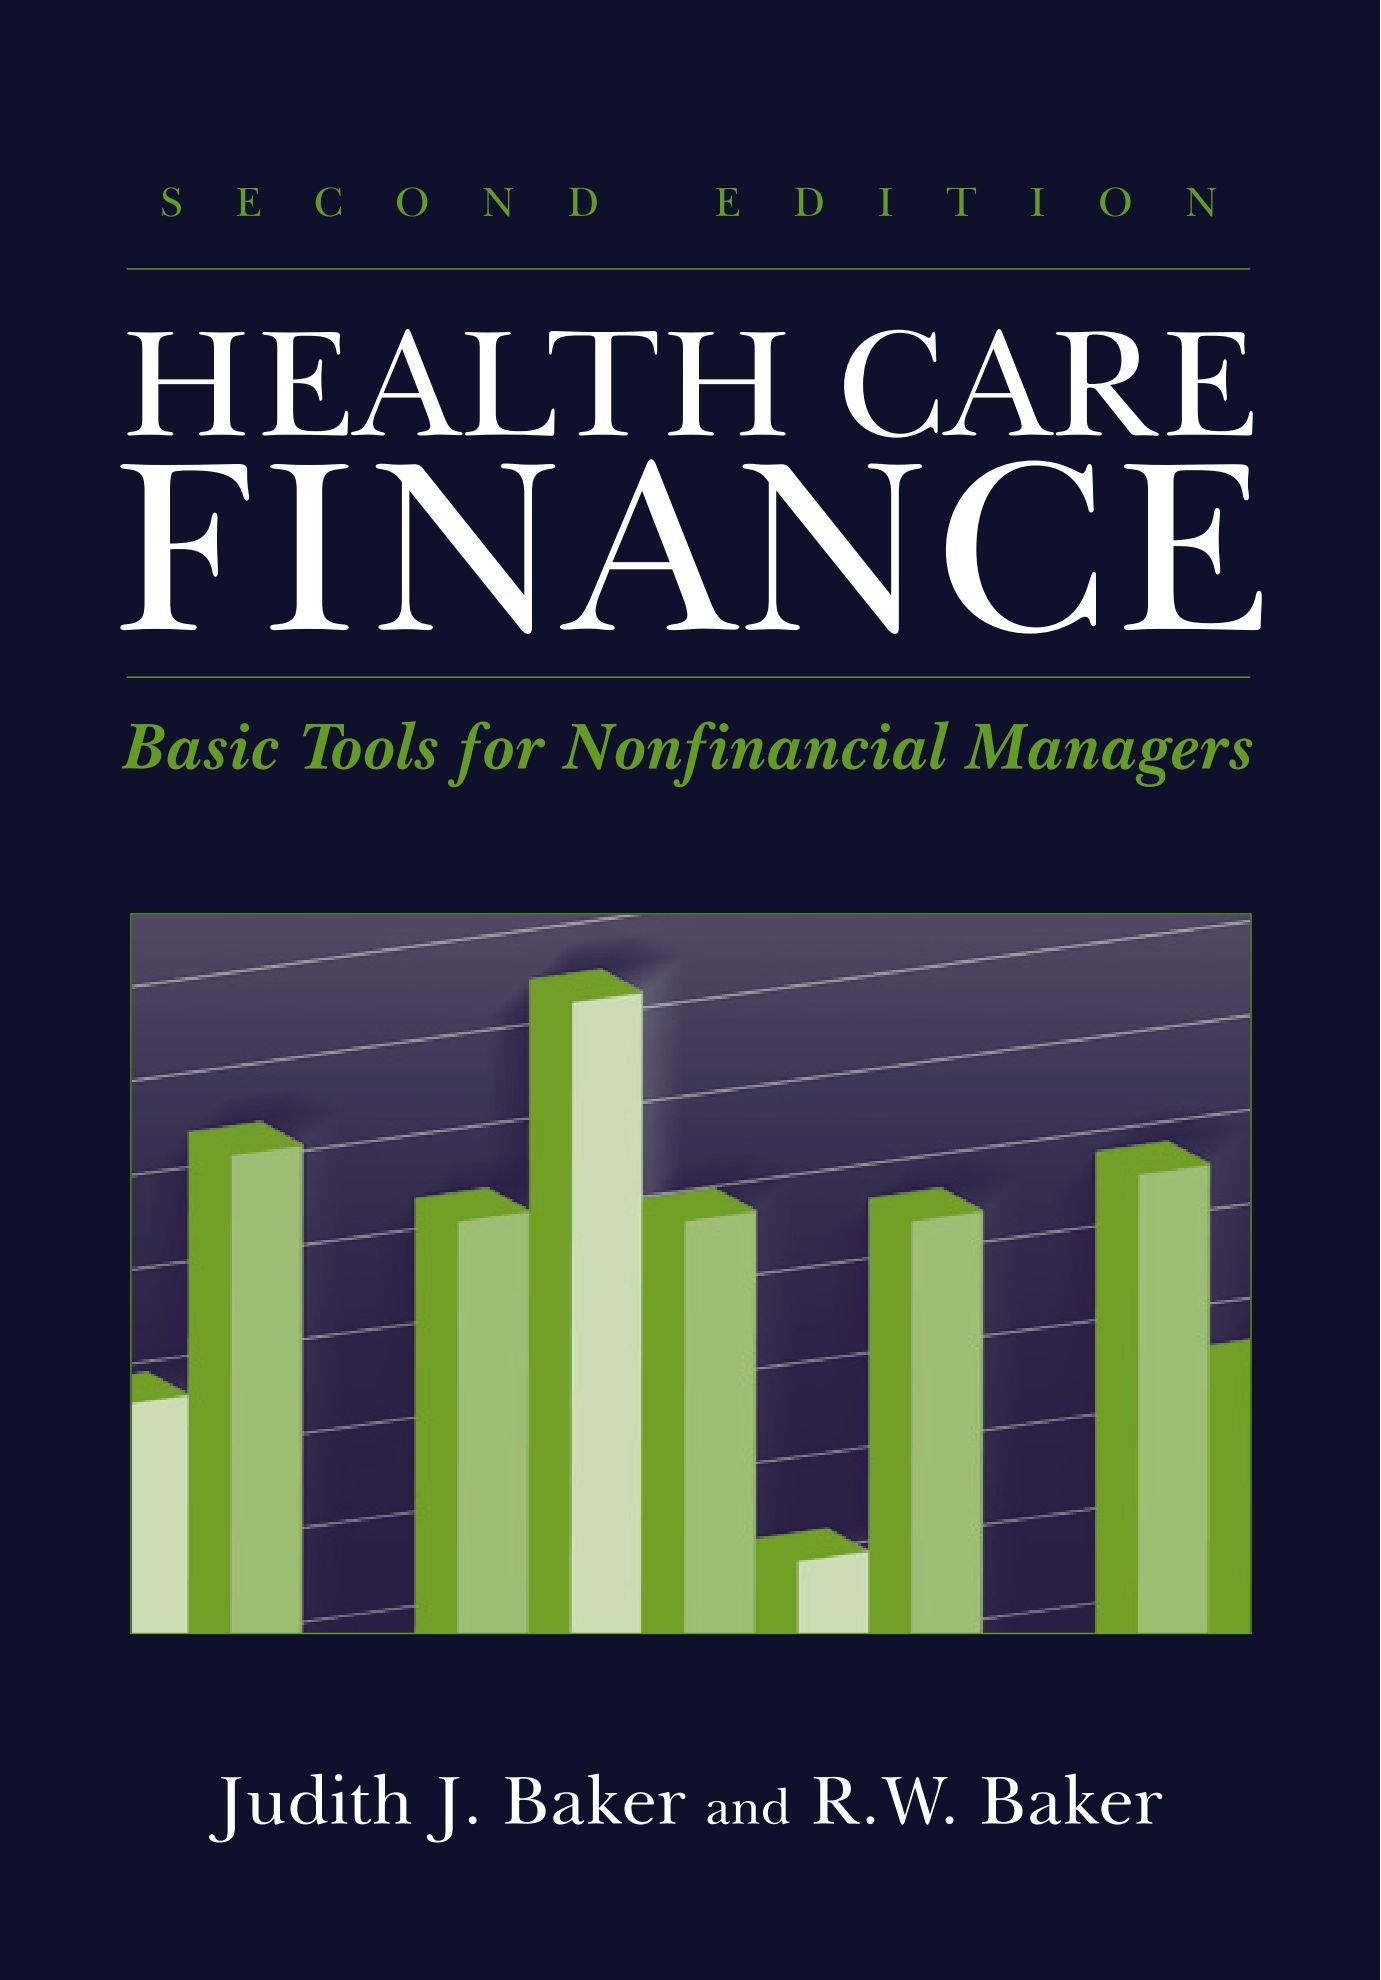 health care finance basic tools for nonfinancial managers 2nd edition judith baker 0763726605, 9780763726607